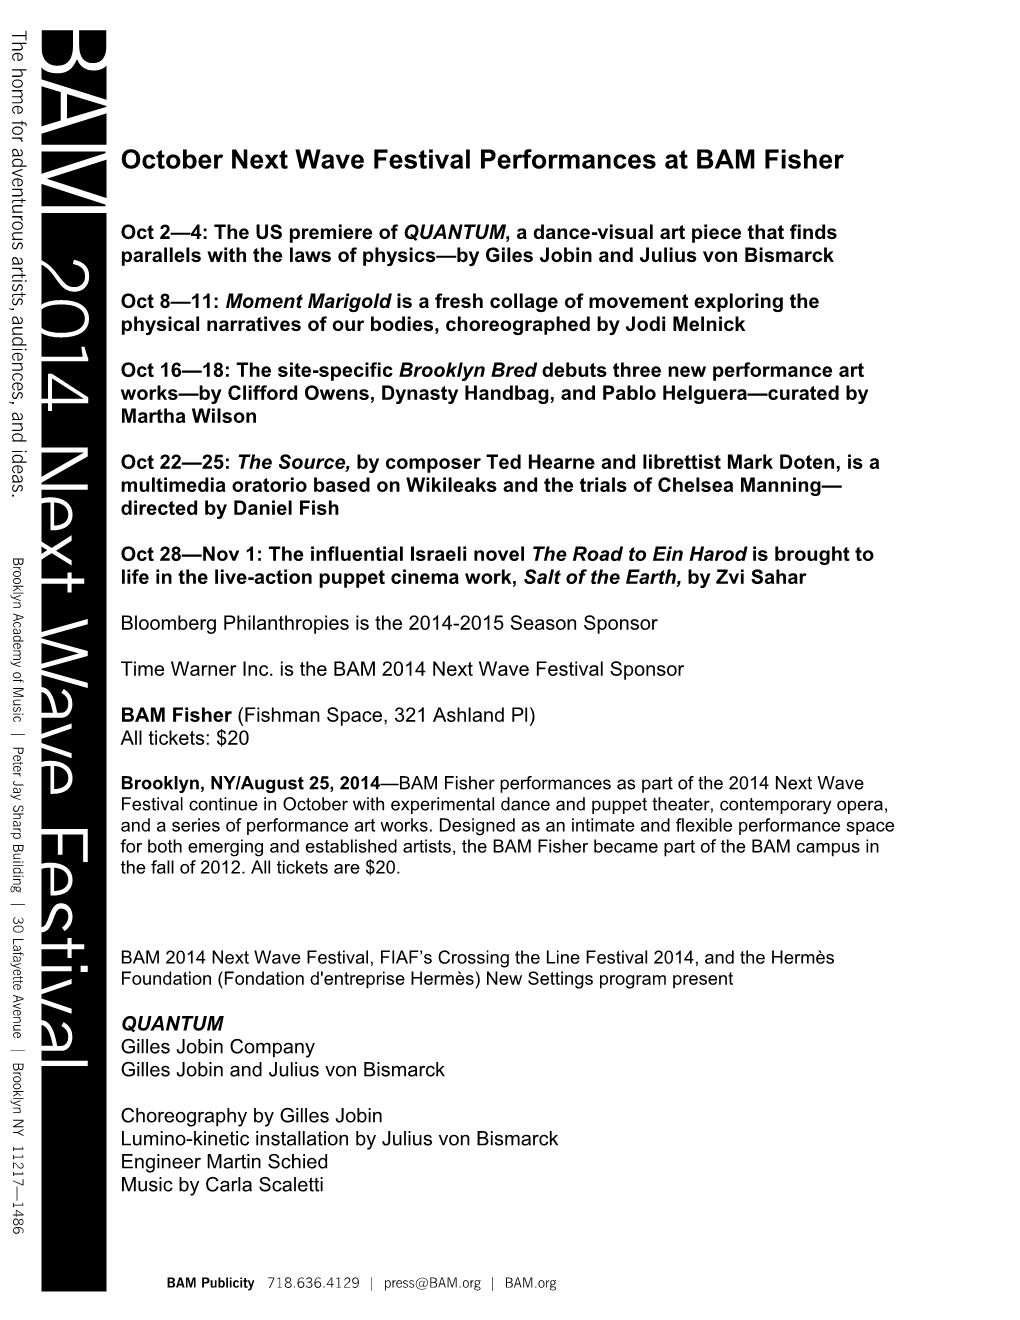 October Next Wave Festival Performances at BAM Fisher